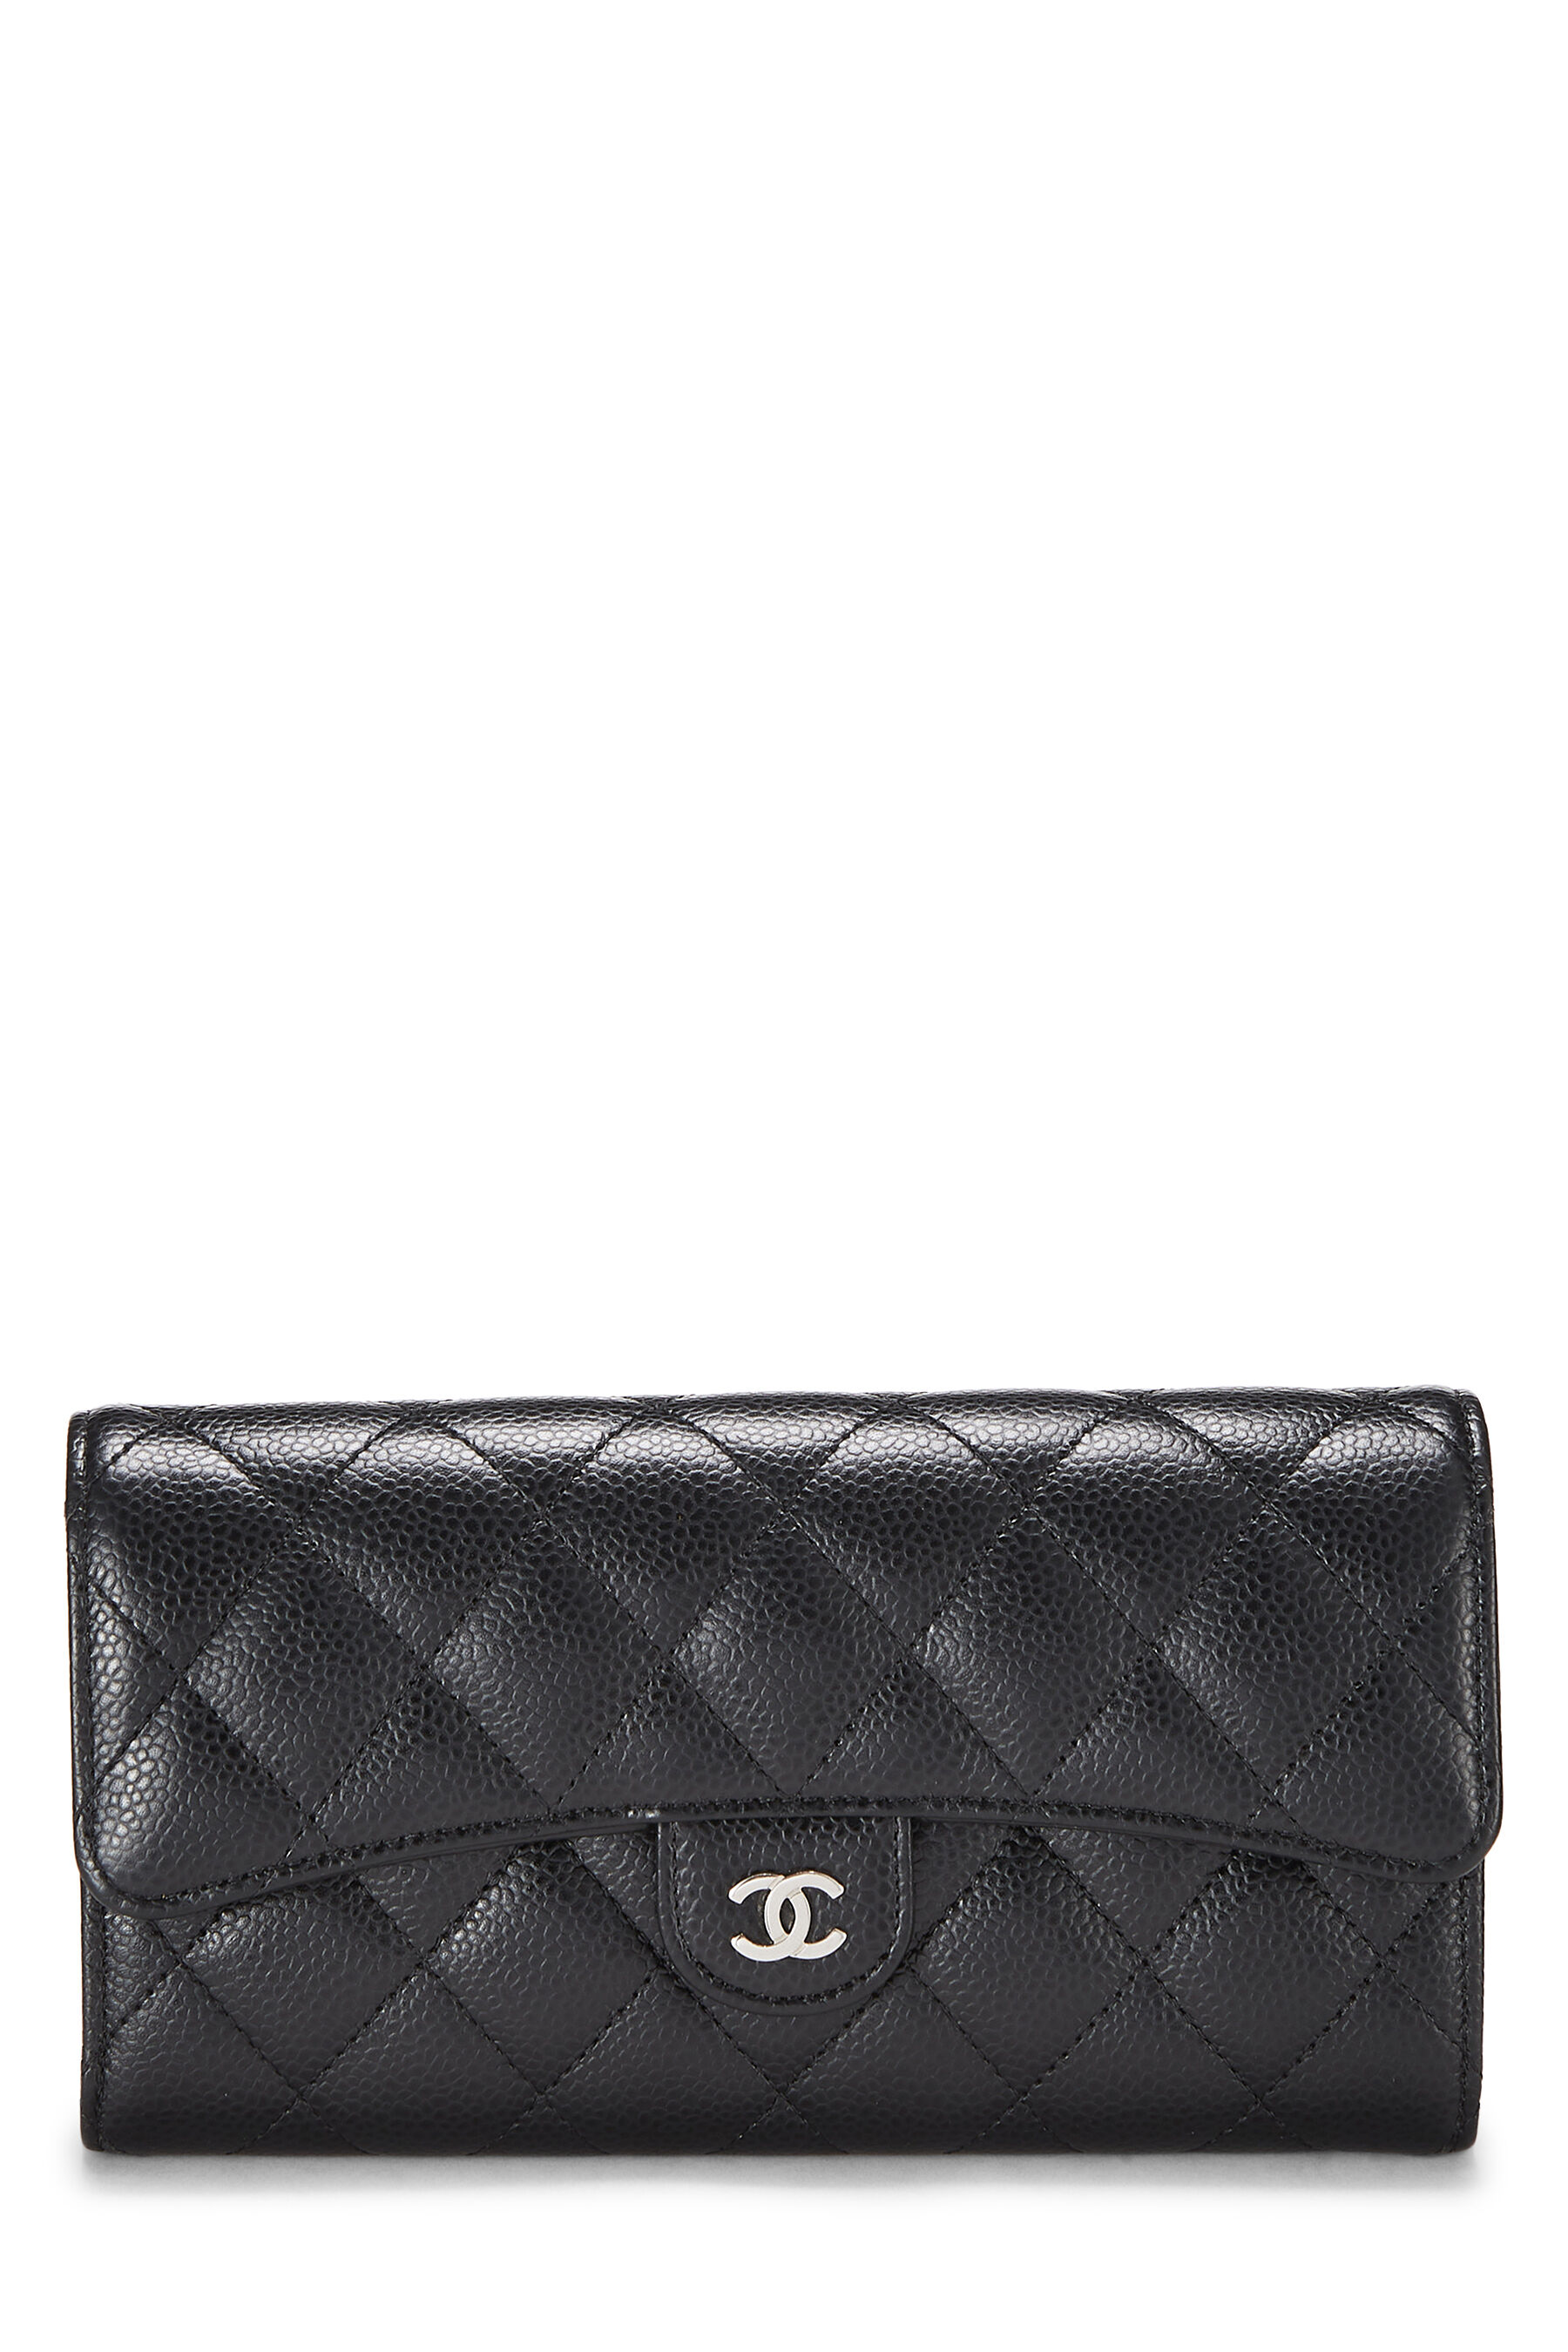 CHANEL Caviar Quilted Large Flap Wallet Dark Green 727306